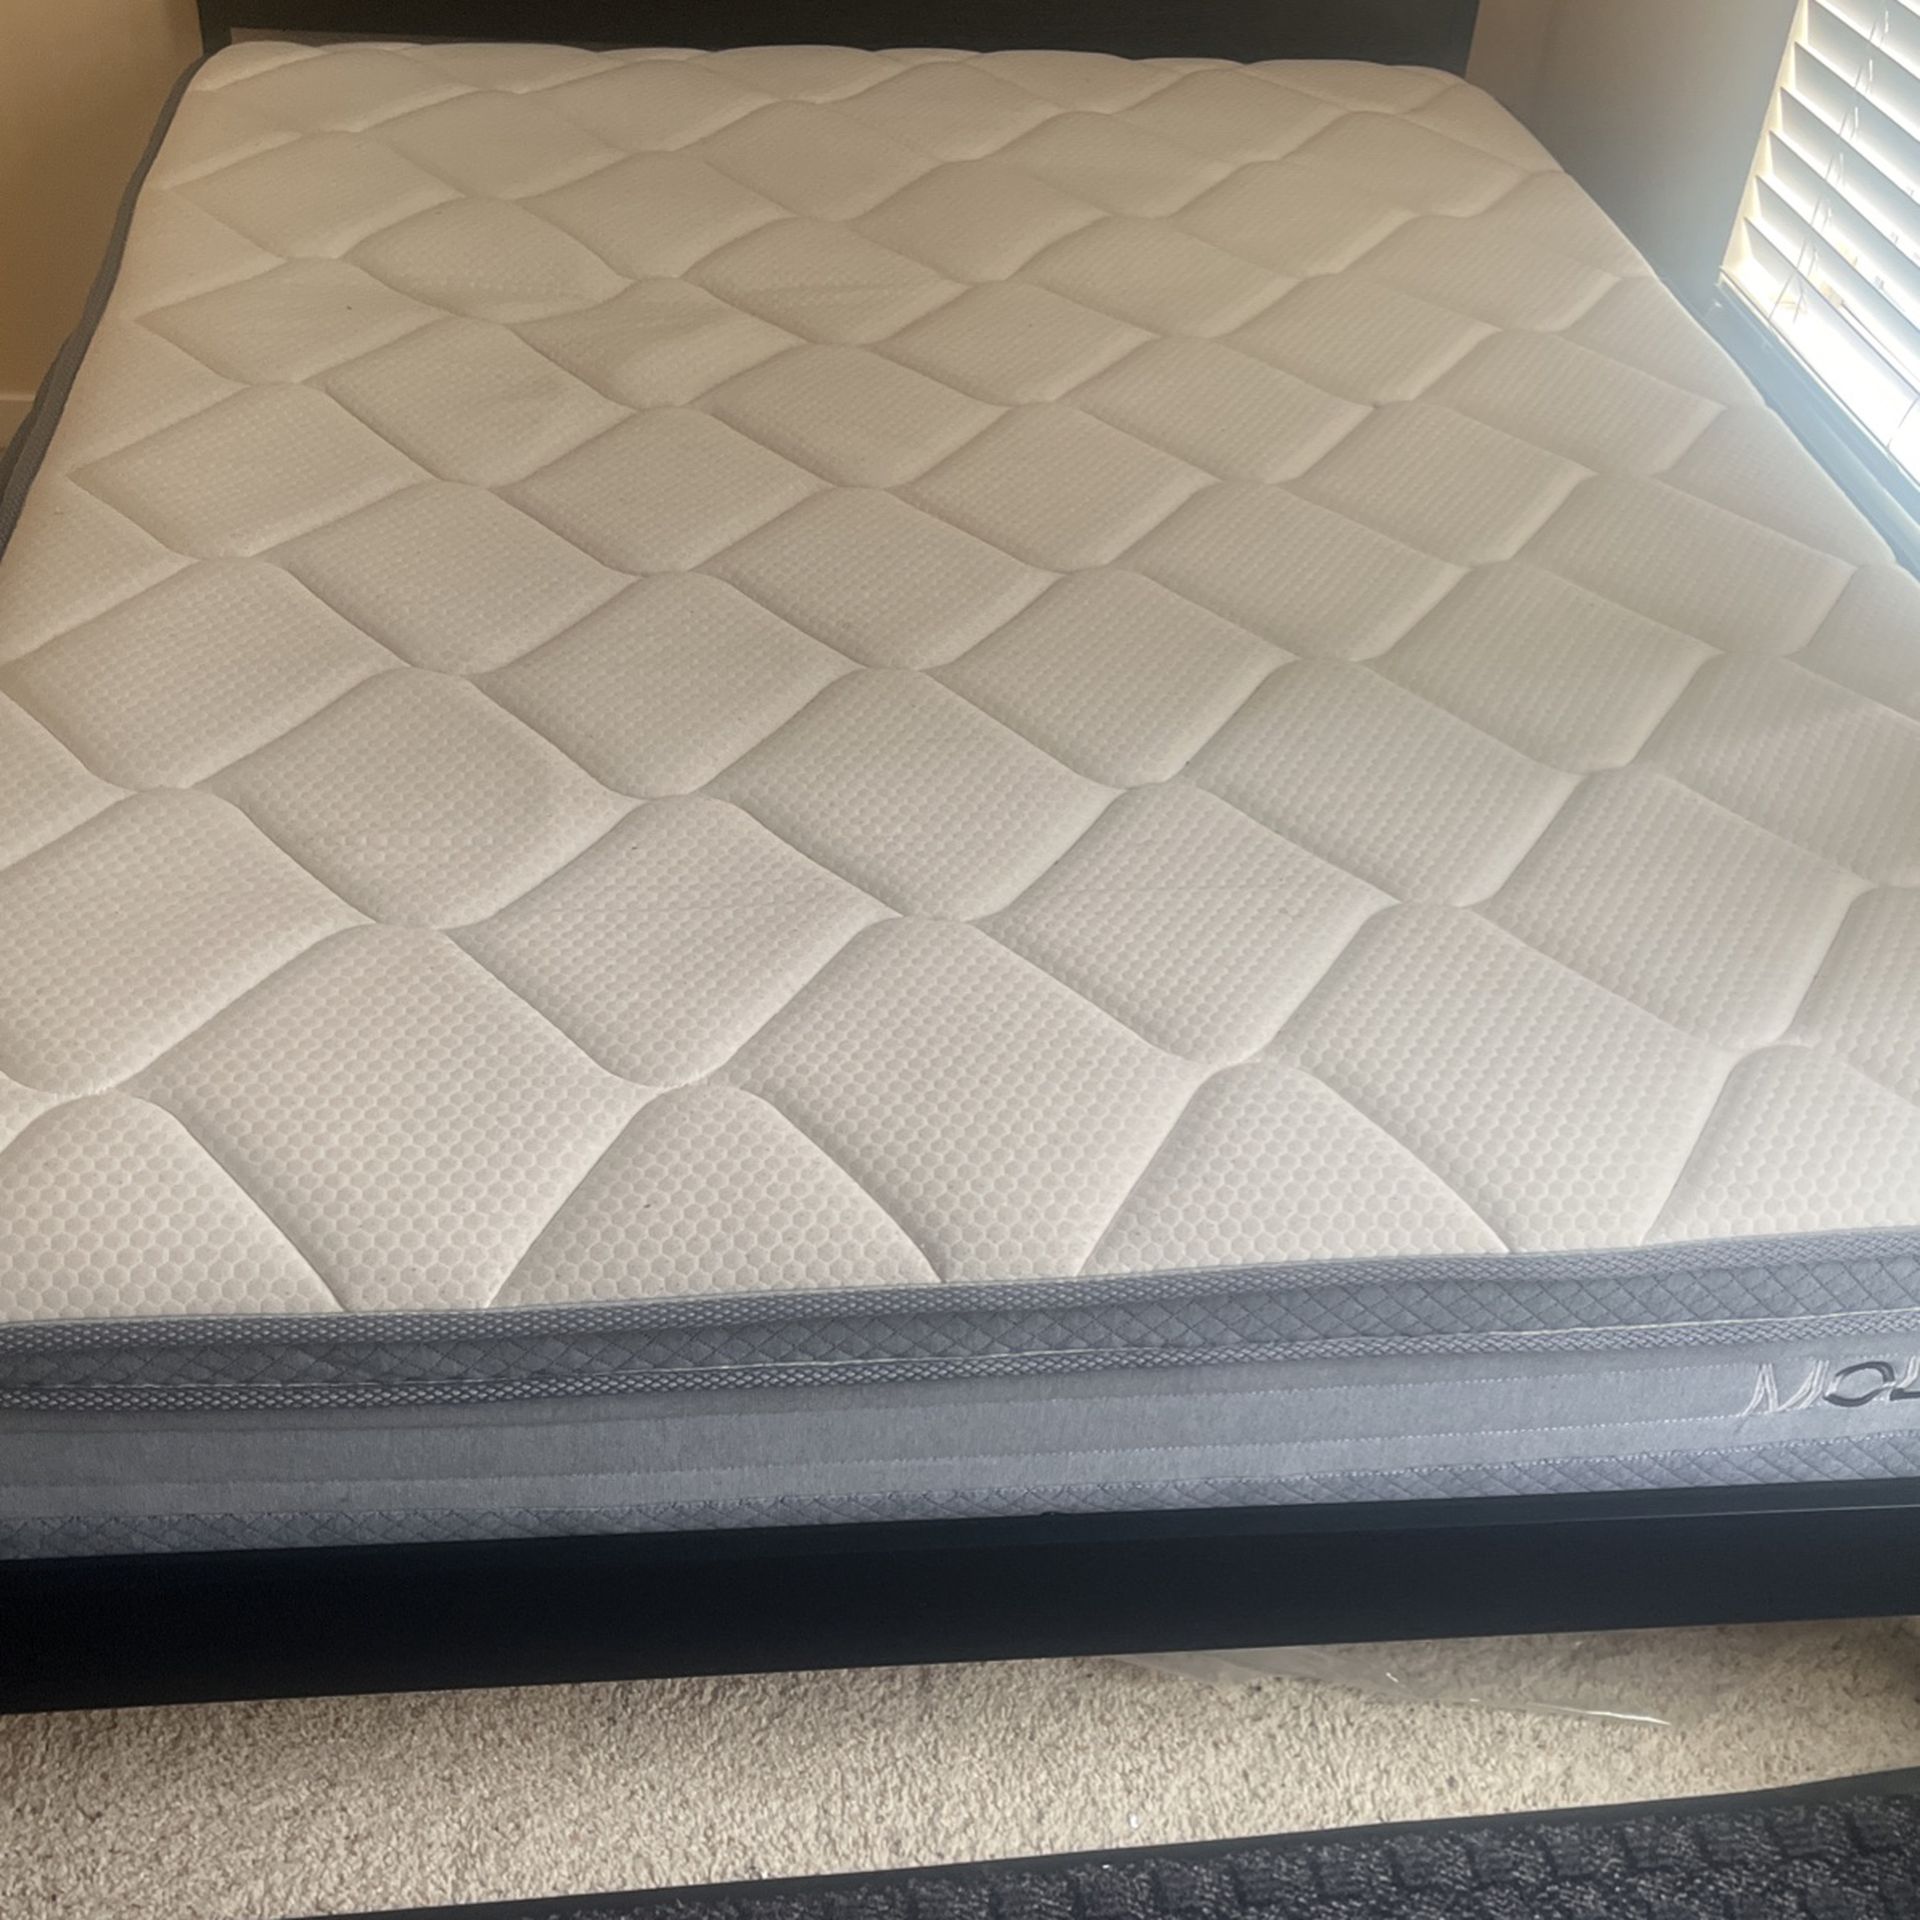 Free Queen Size Bed. Molblly Matresses. 1 Year Old. With Bed Frame Headboard 